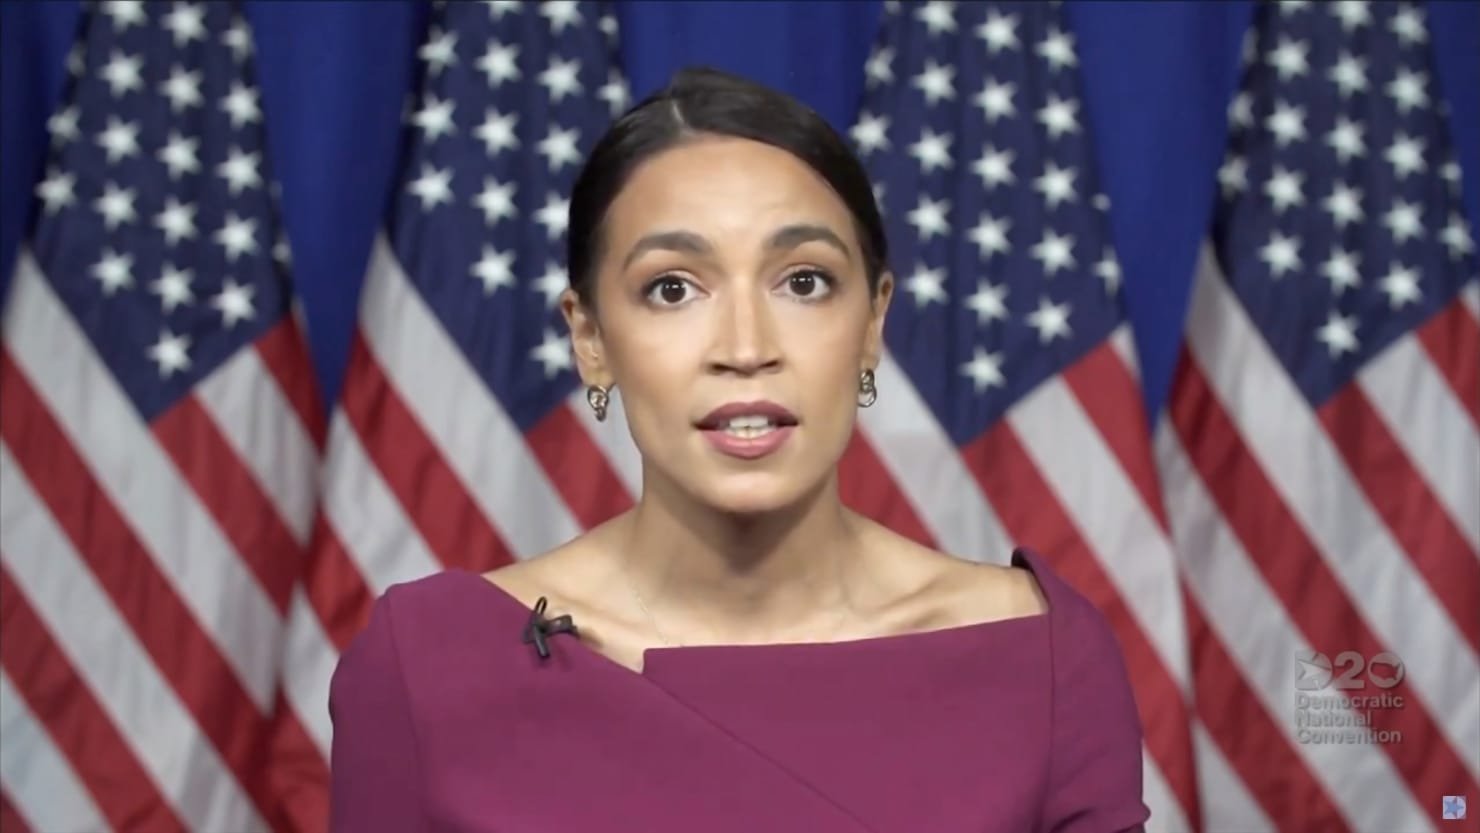 AOC Clears Up Confusion About DNC Speech Nominating Bernie